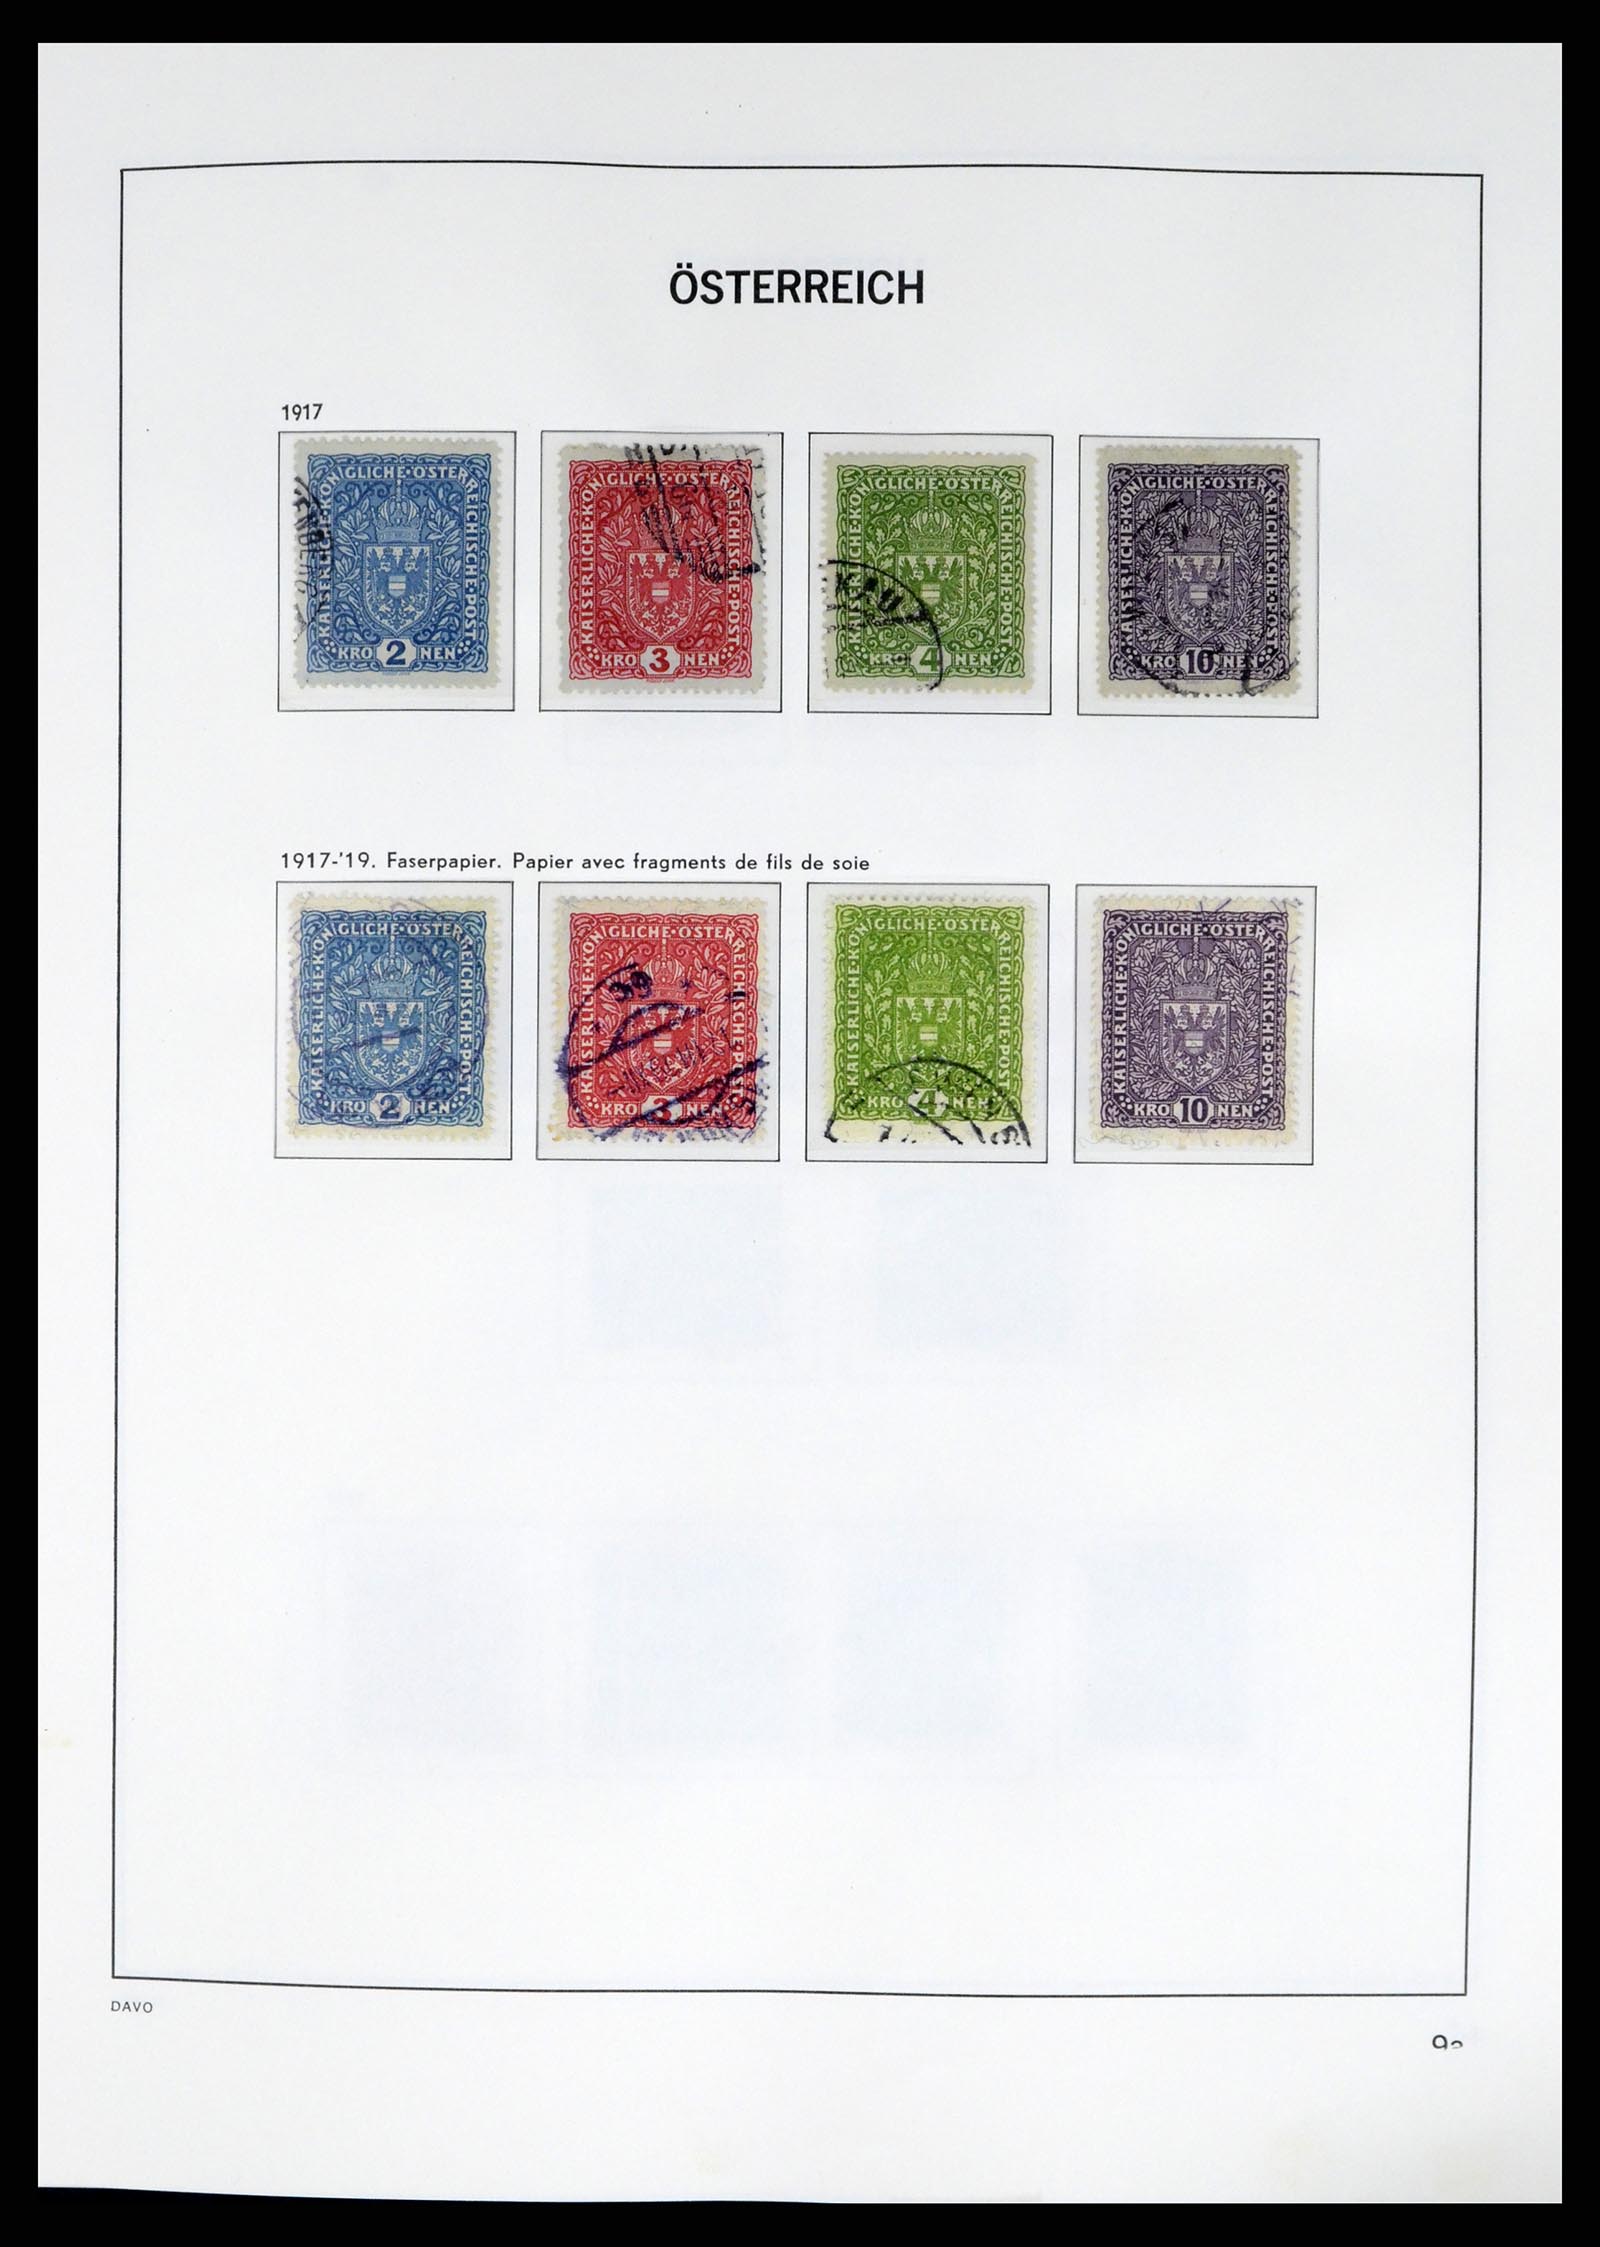 37675 011 - Stamp collection 37675 Austria 1850-2019!